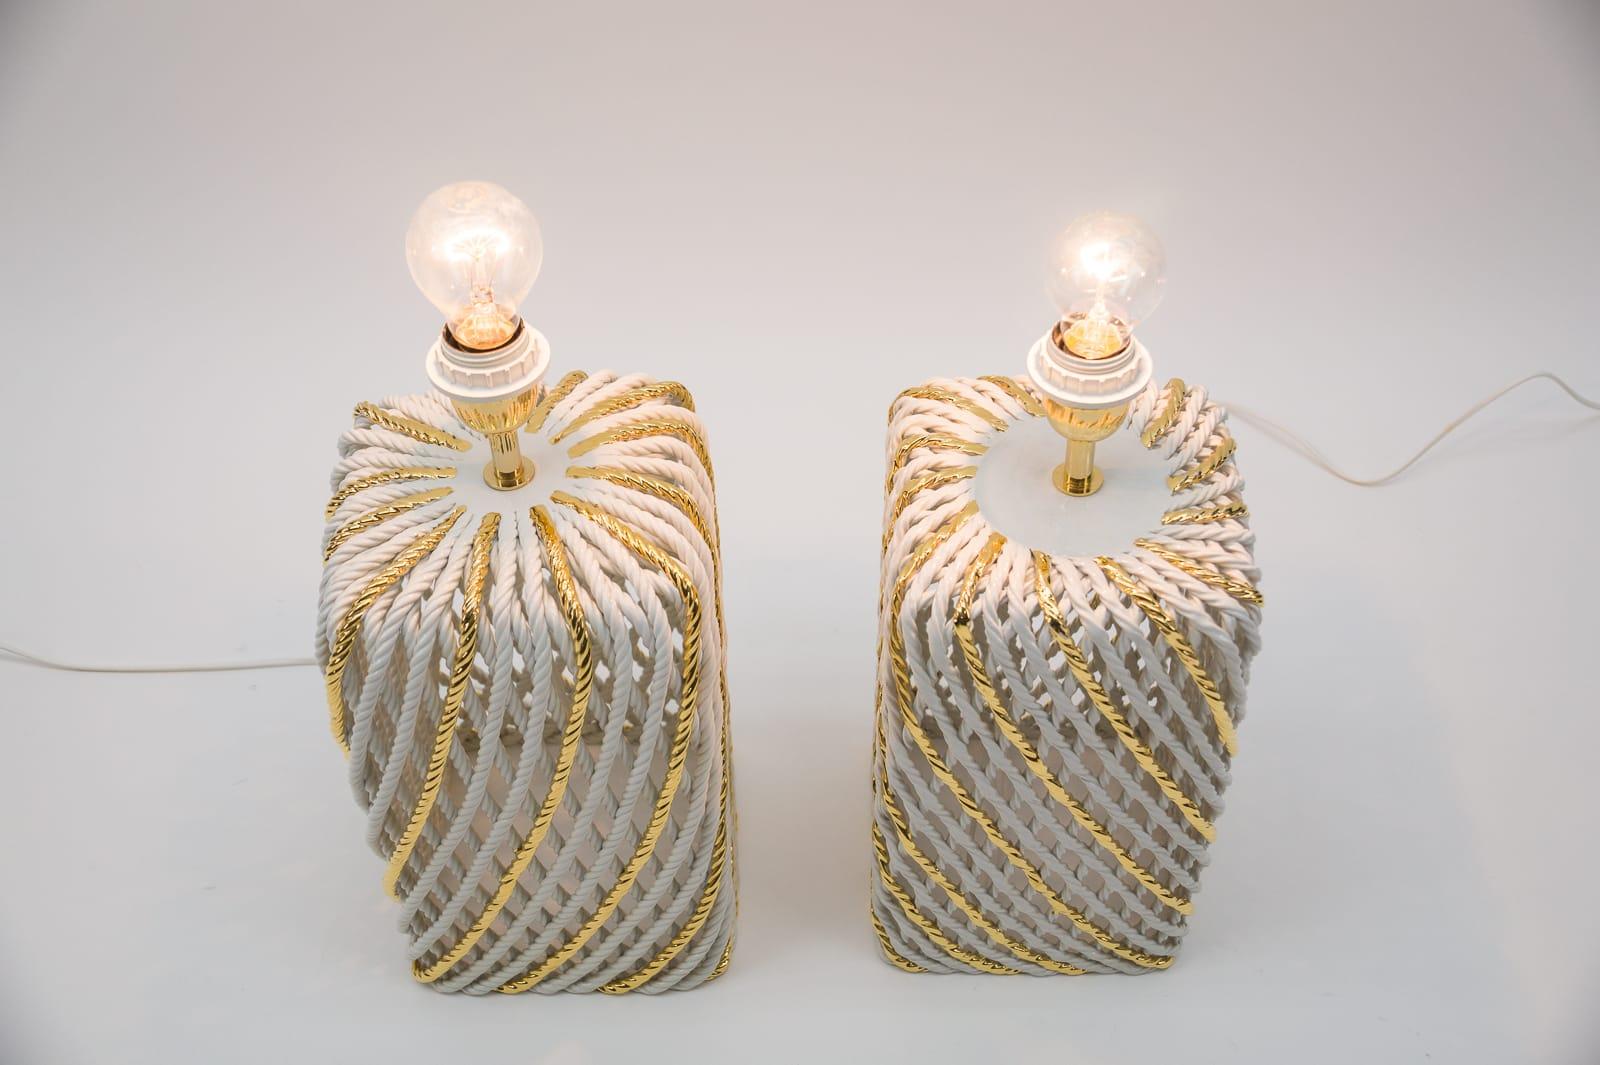 Pair of Extravagant Ceramic Braid Table Lamps, 1980s Italy For Sale 6